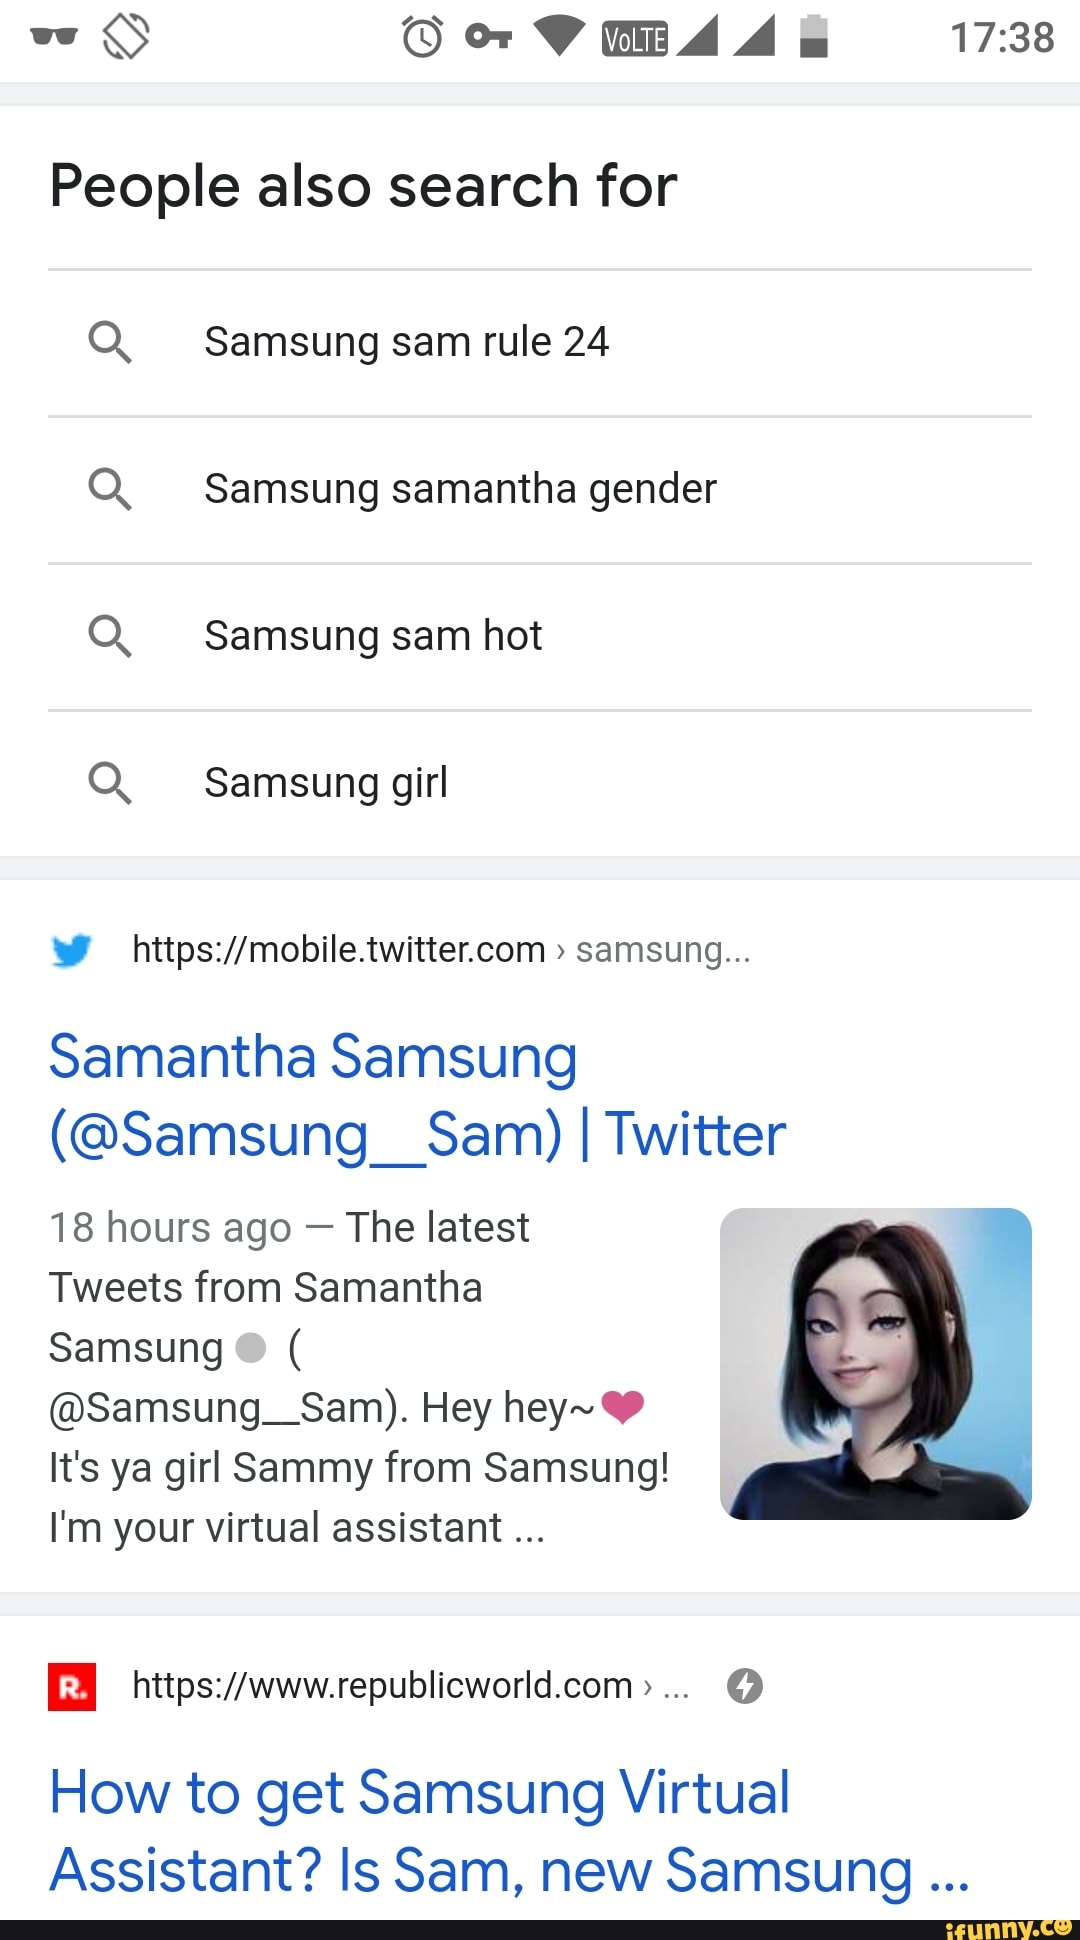 People also search for Samsung sam rule 24 Q. Samsung samantha